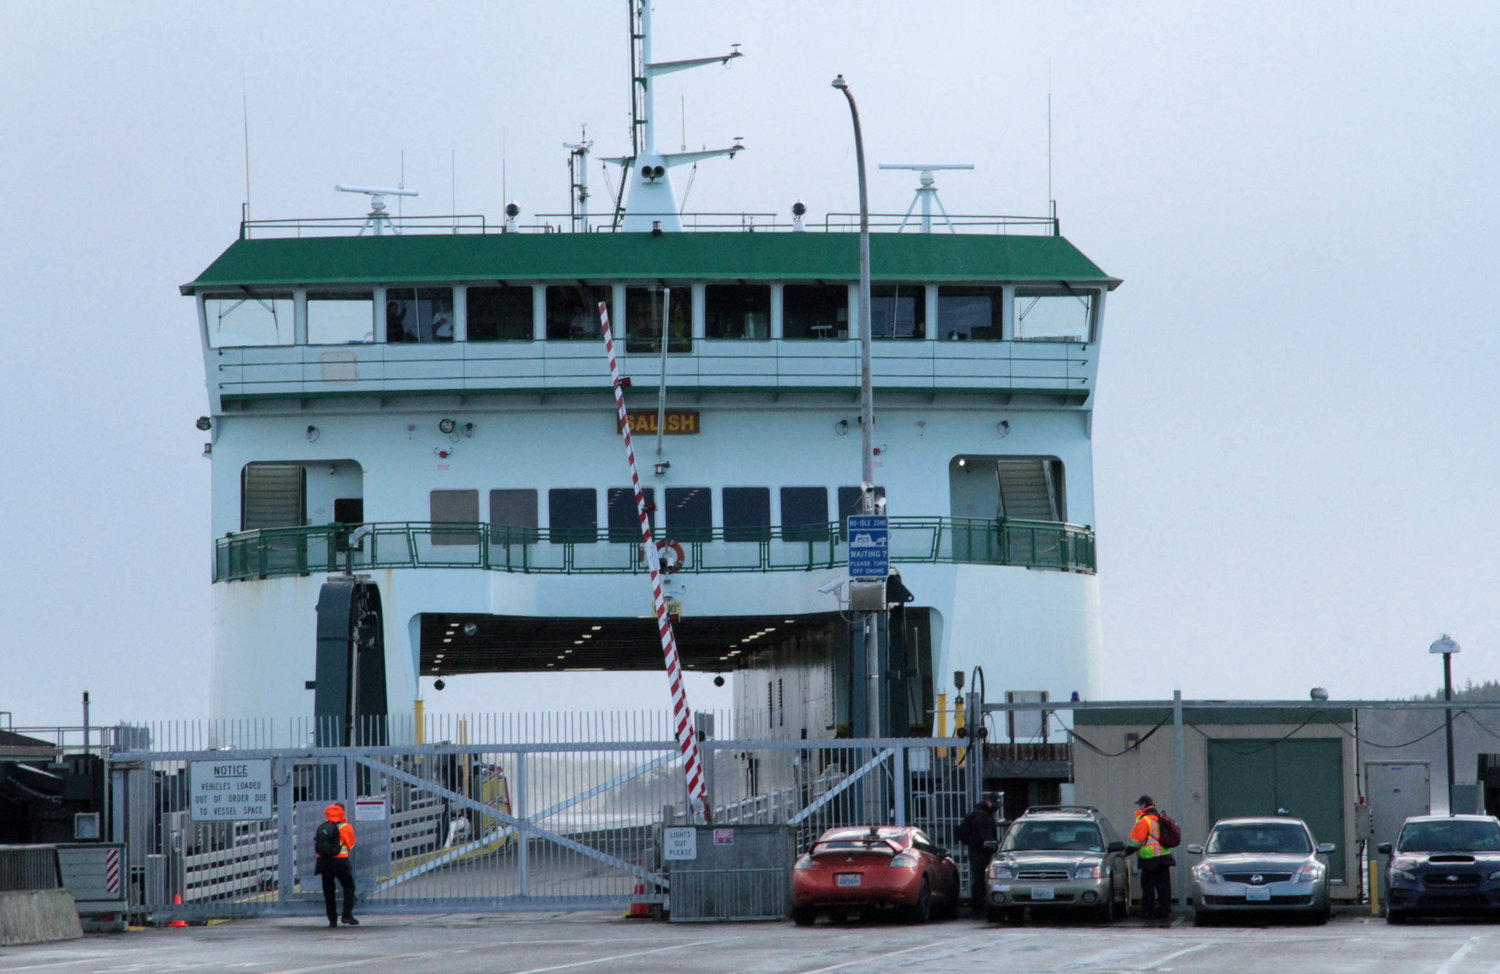 Ferry sailings were canceled for most of Monday from Port Townsend to Whidbey Island.